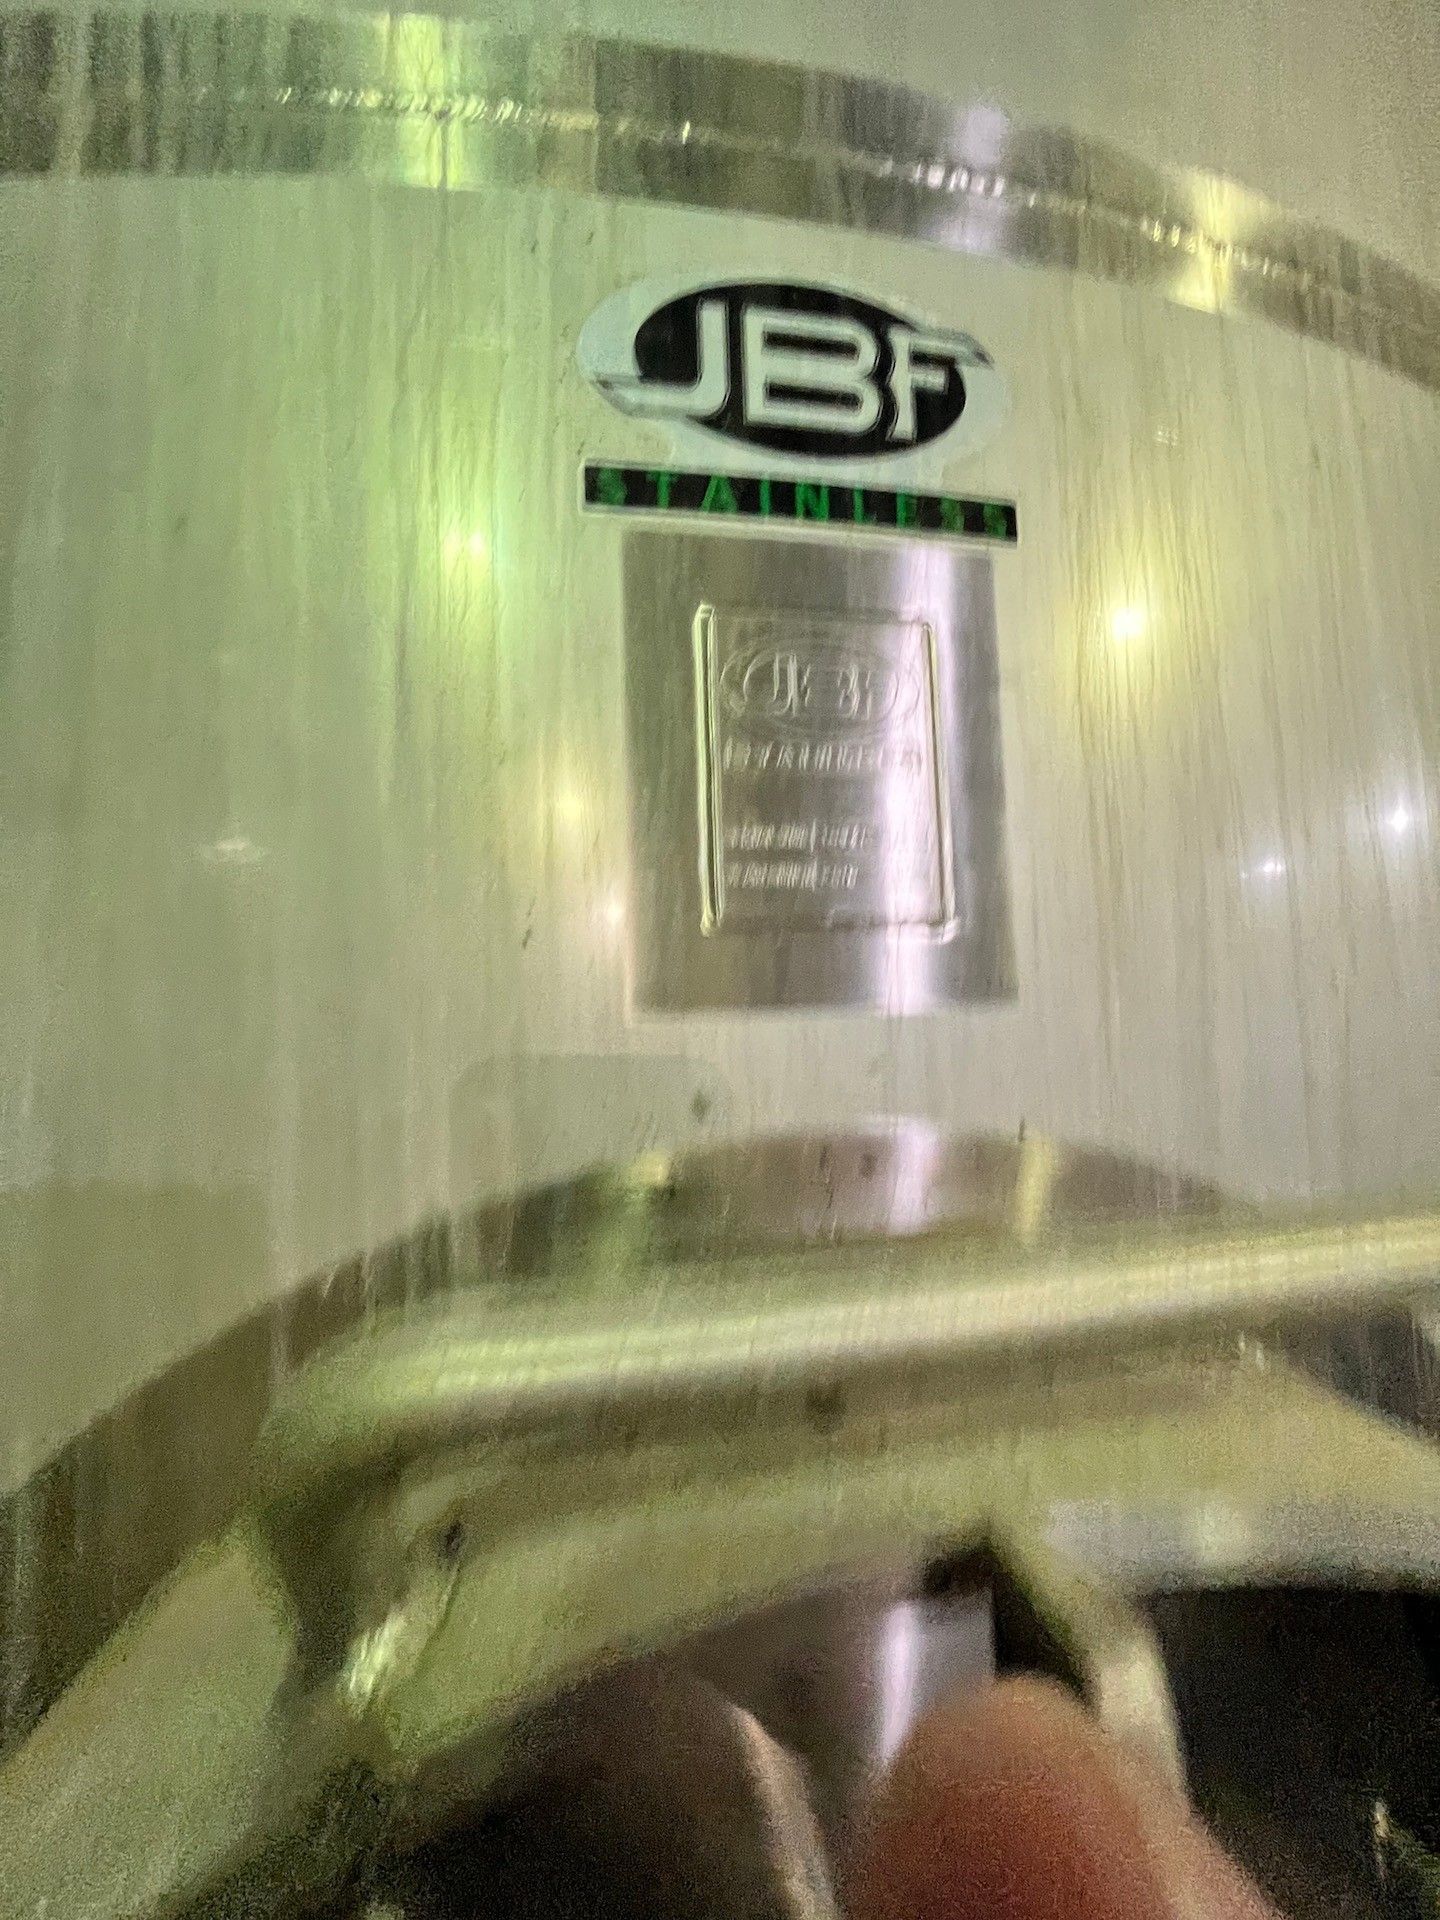 2019 JBF 3,780 GALLON S/S MIXING TANK, S/N 19948, TOP-MOUNT PROP STYLE AGITATION, APPROX. 108 IN. - Image 6 of 7